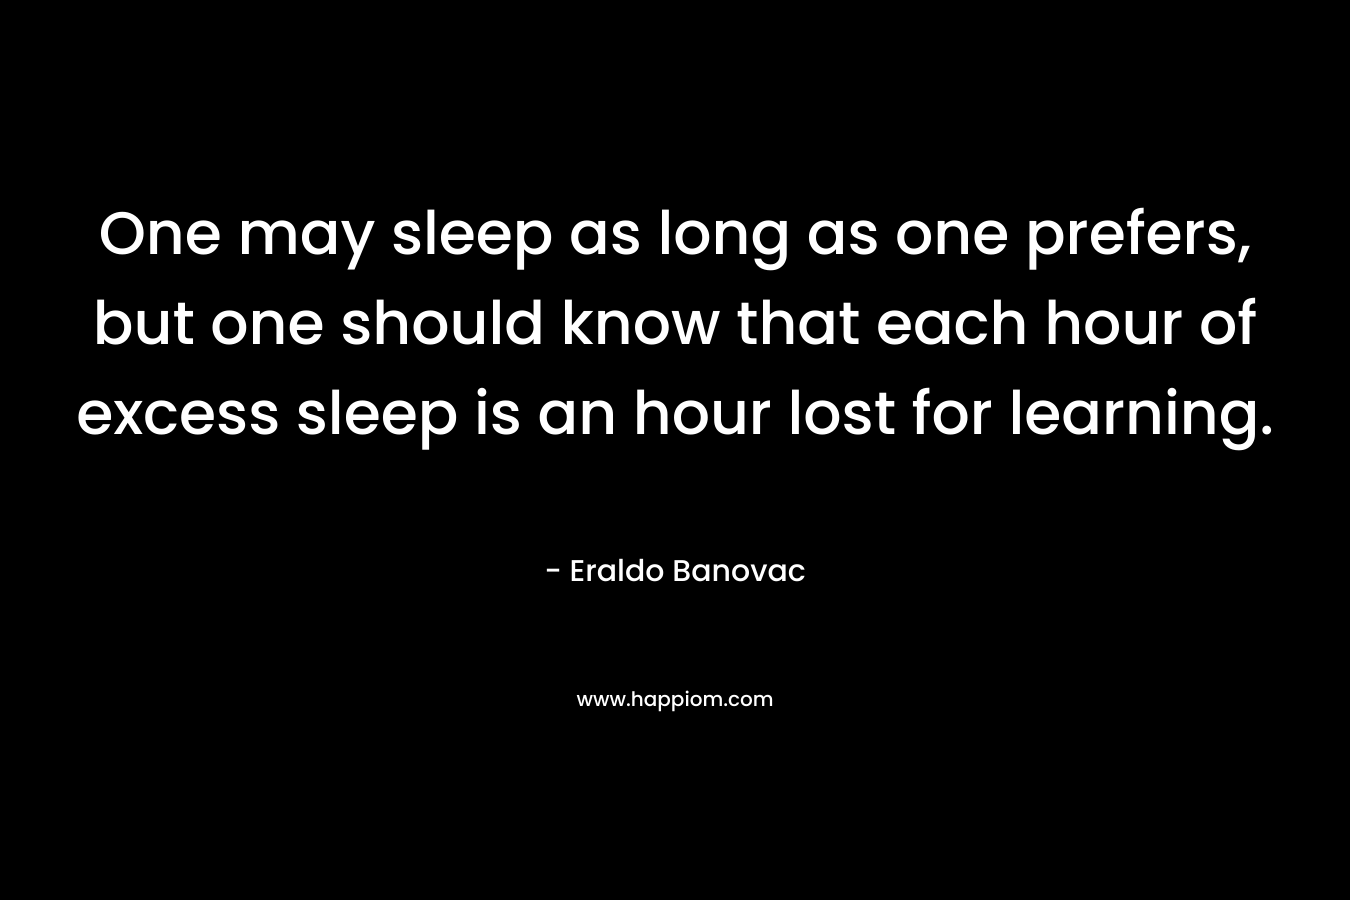 One may sleep as long as one prefers, but one should know that each hour of excess sleep is an hour lost for learning.